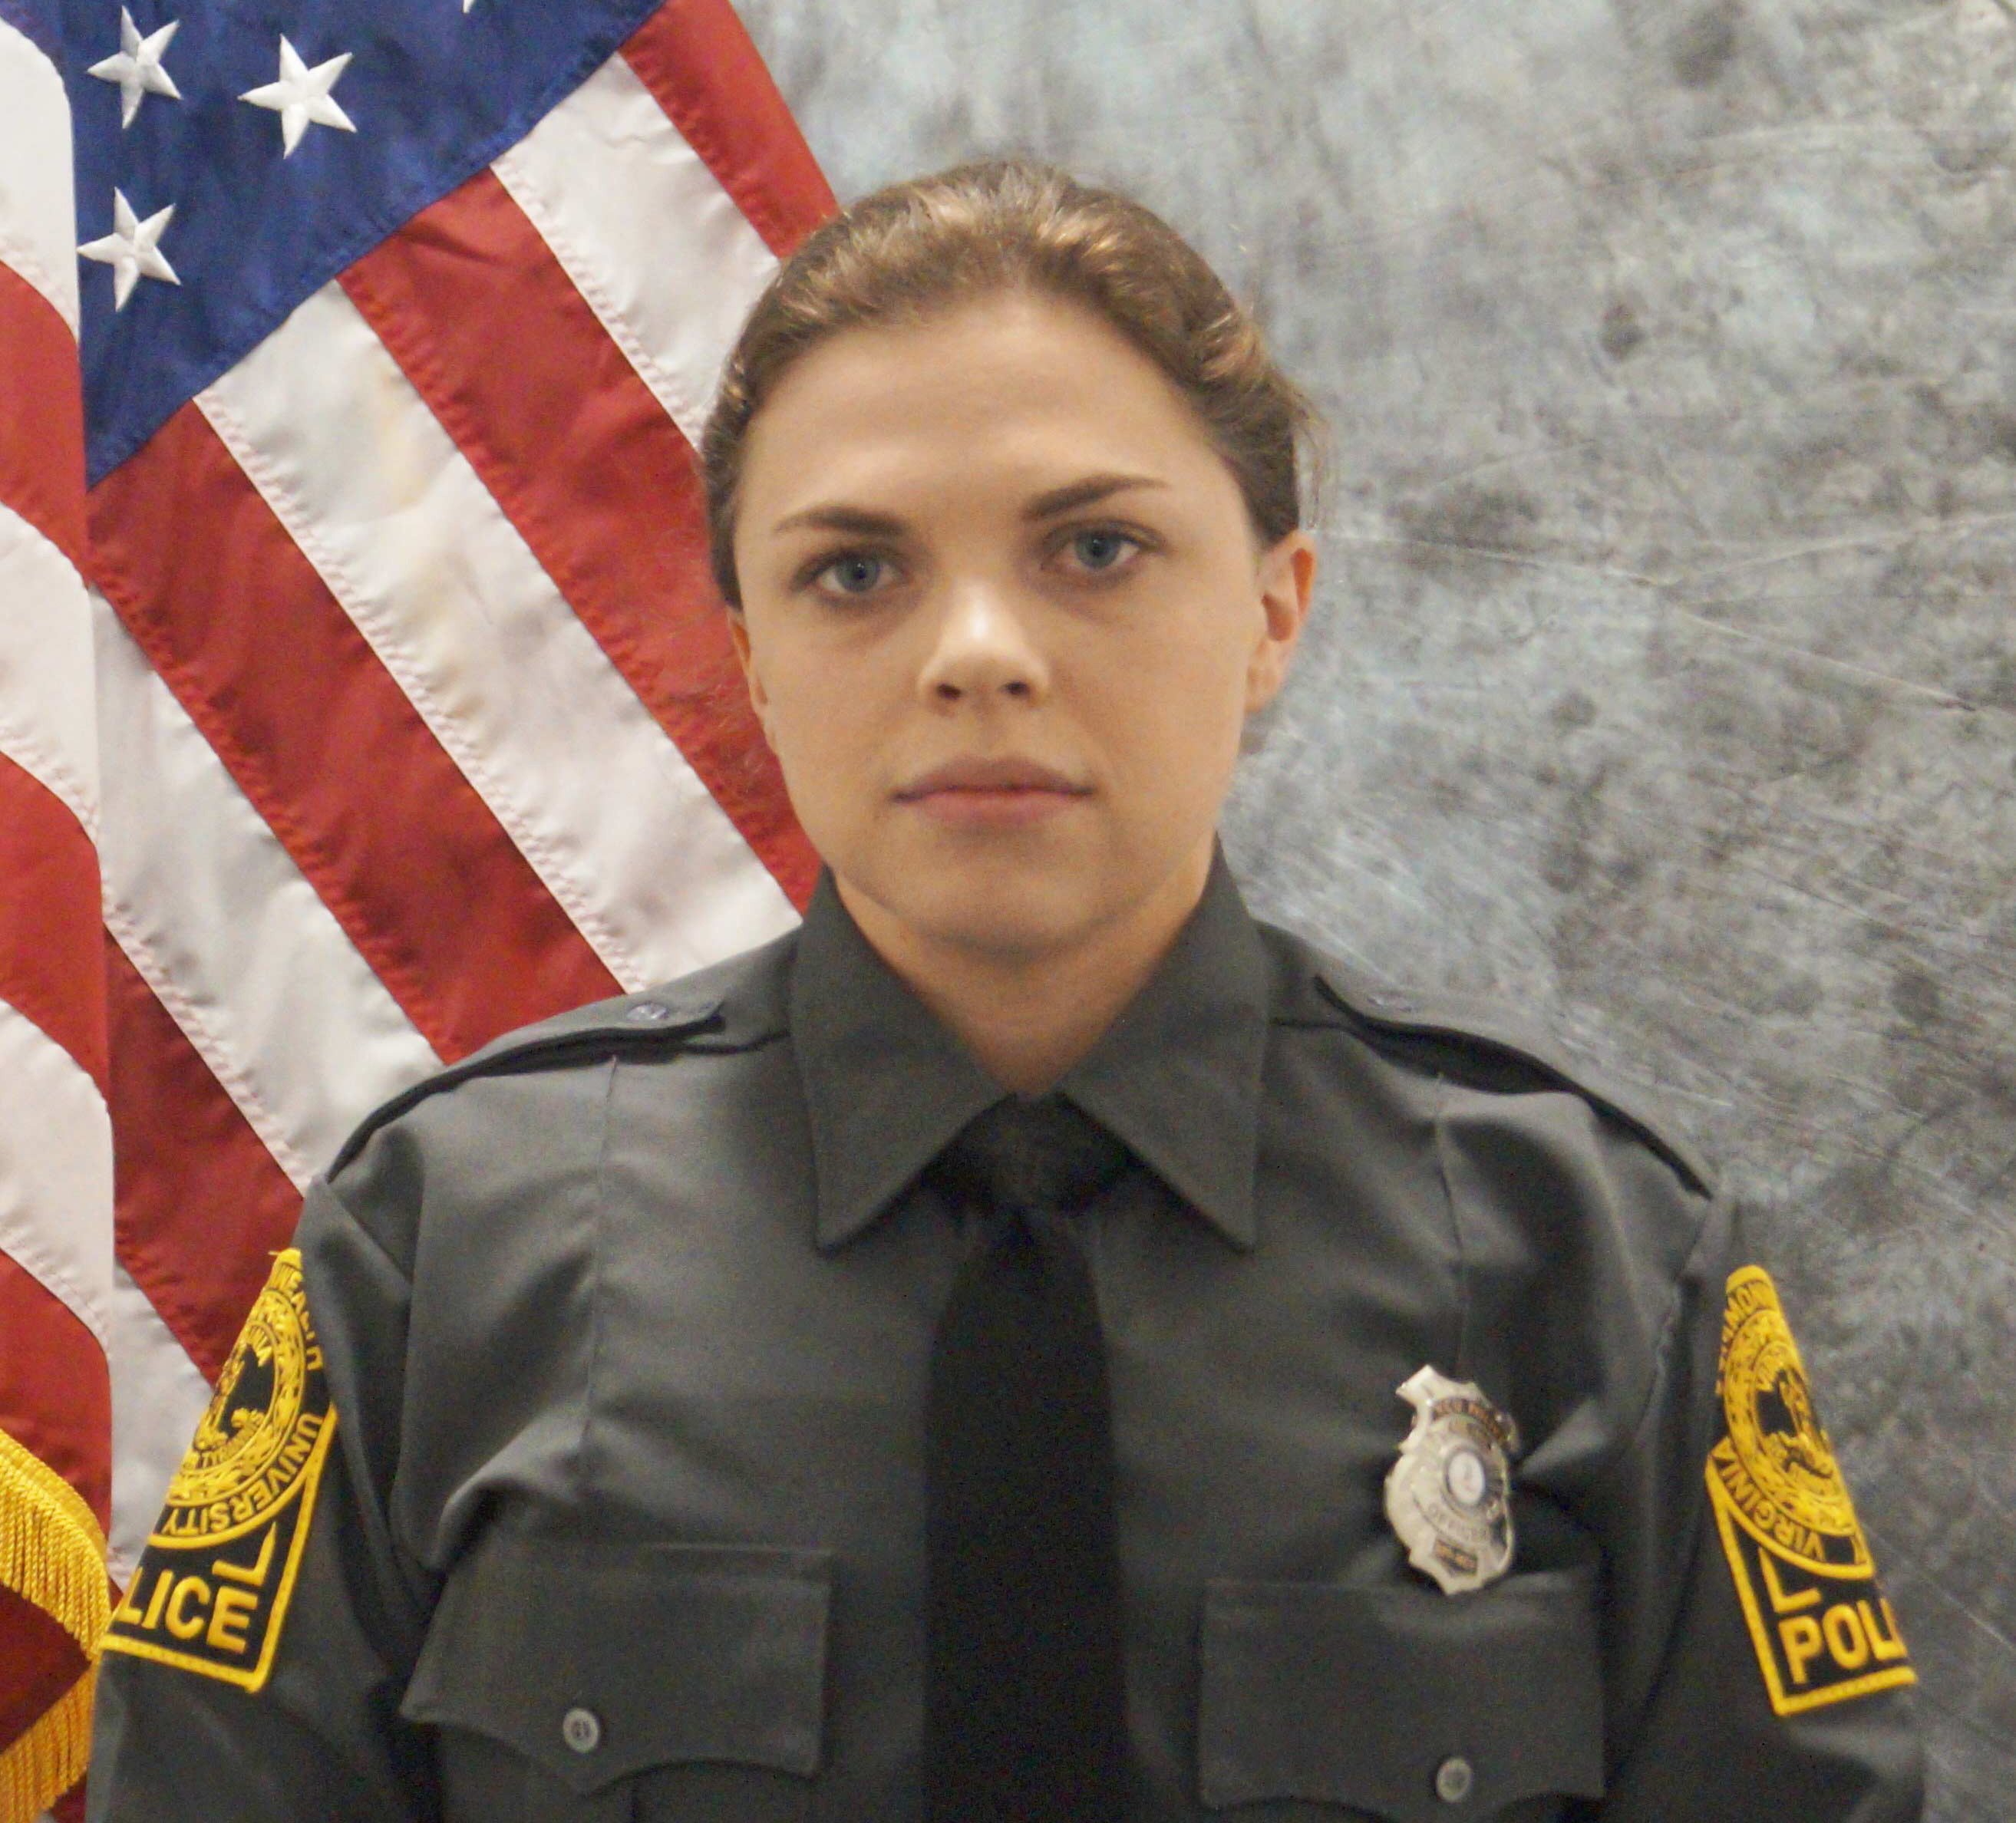 The 2021 Wilder School Fall Commencement student speaker is VCU police officer and criminal justice undergraduate, Caroline Bowen.